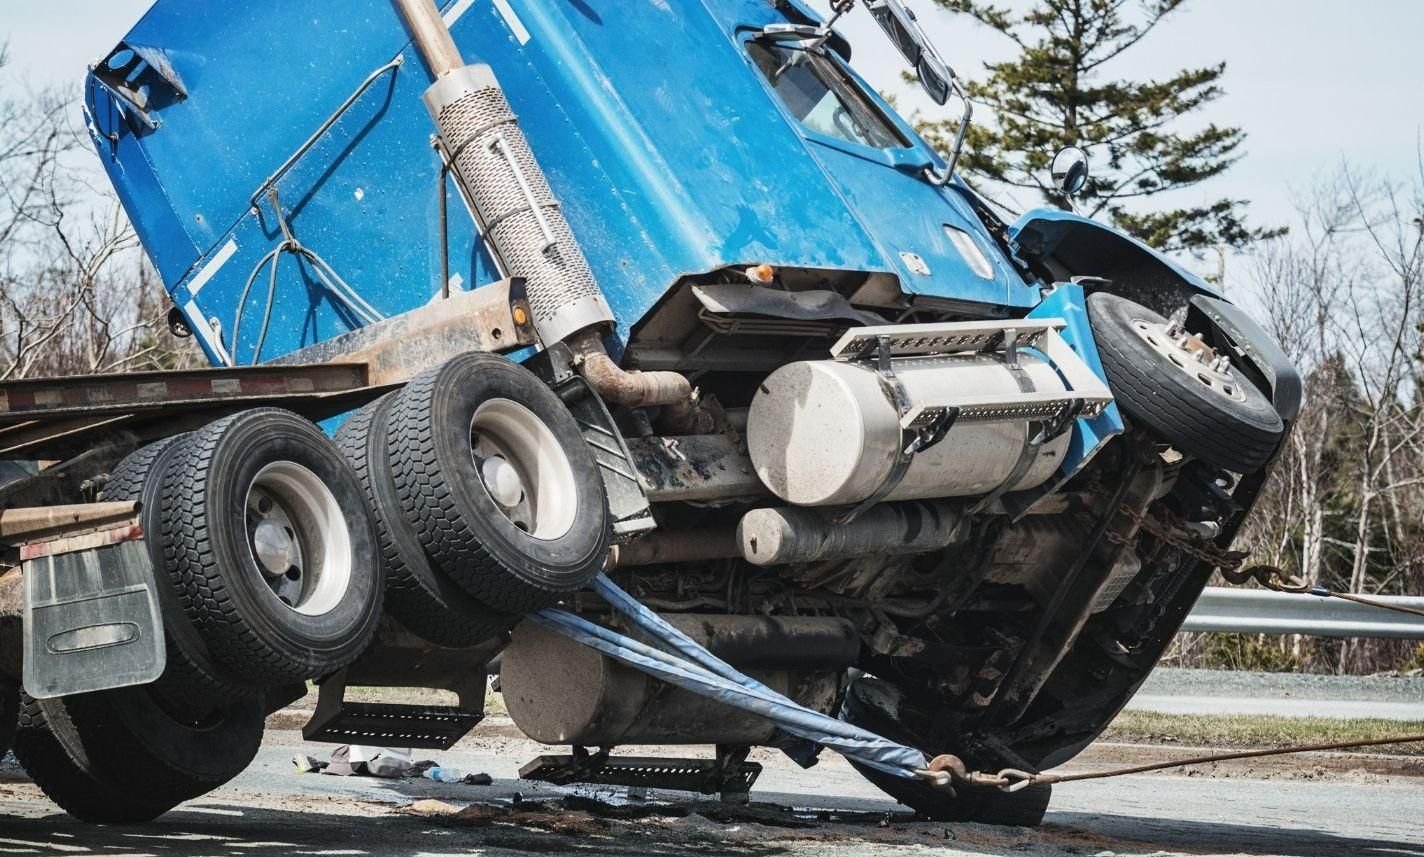 bowersville-commercial-truck-accident-injury-lawyer